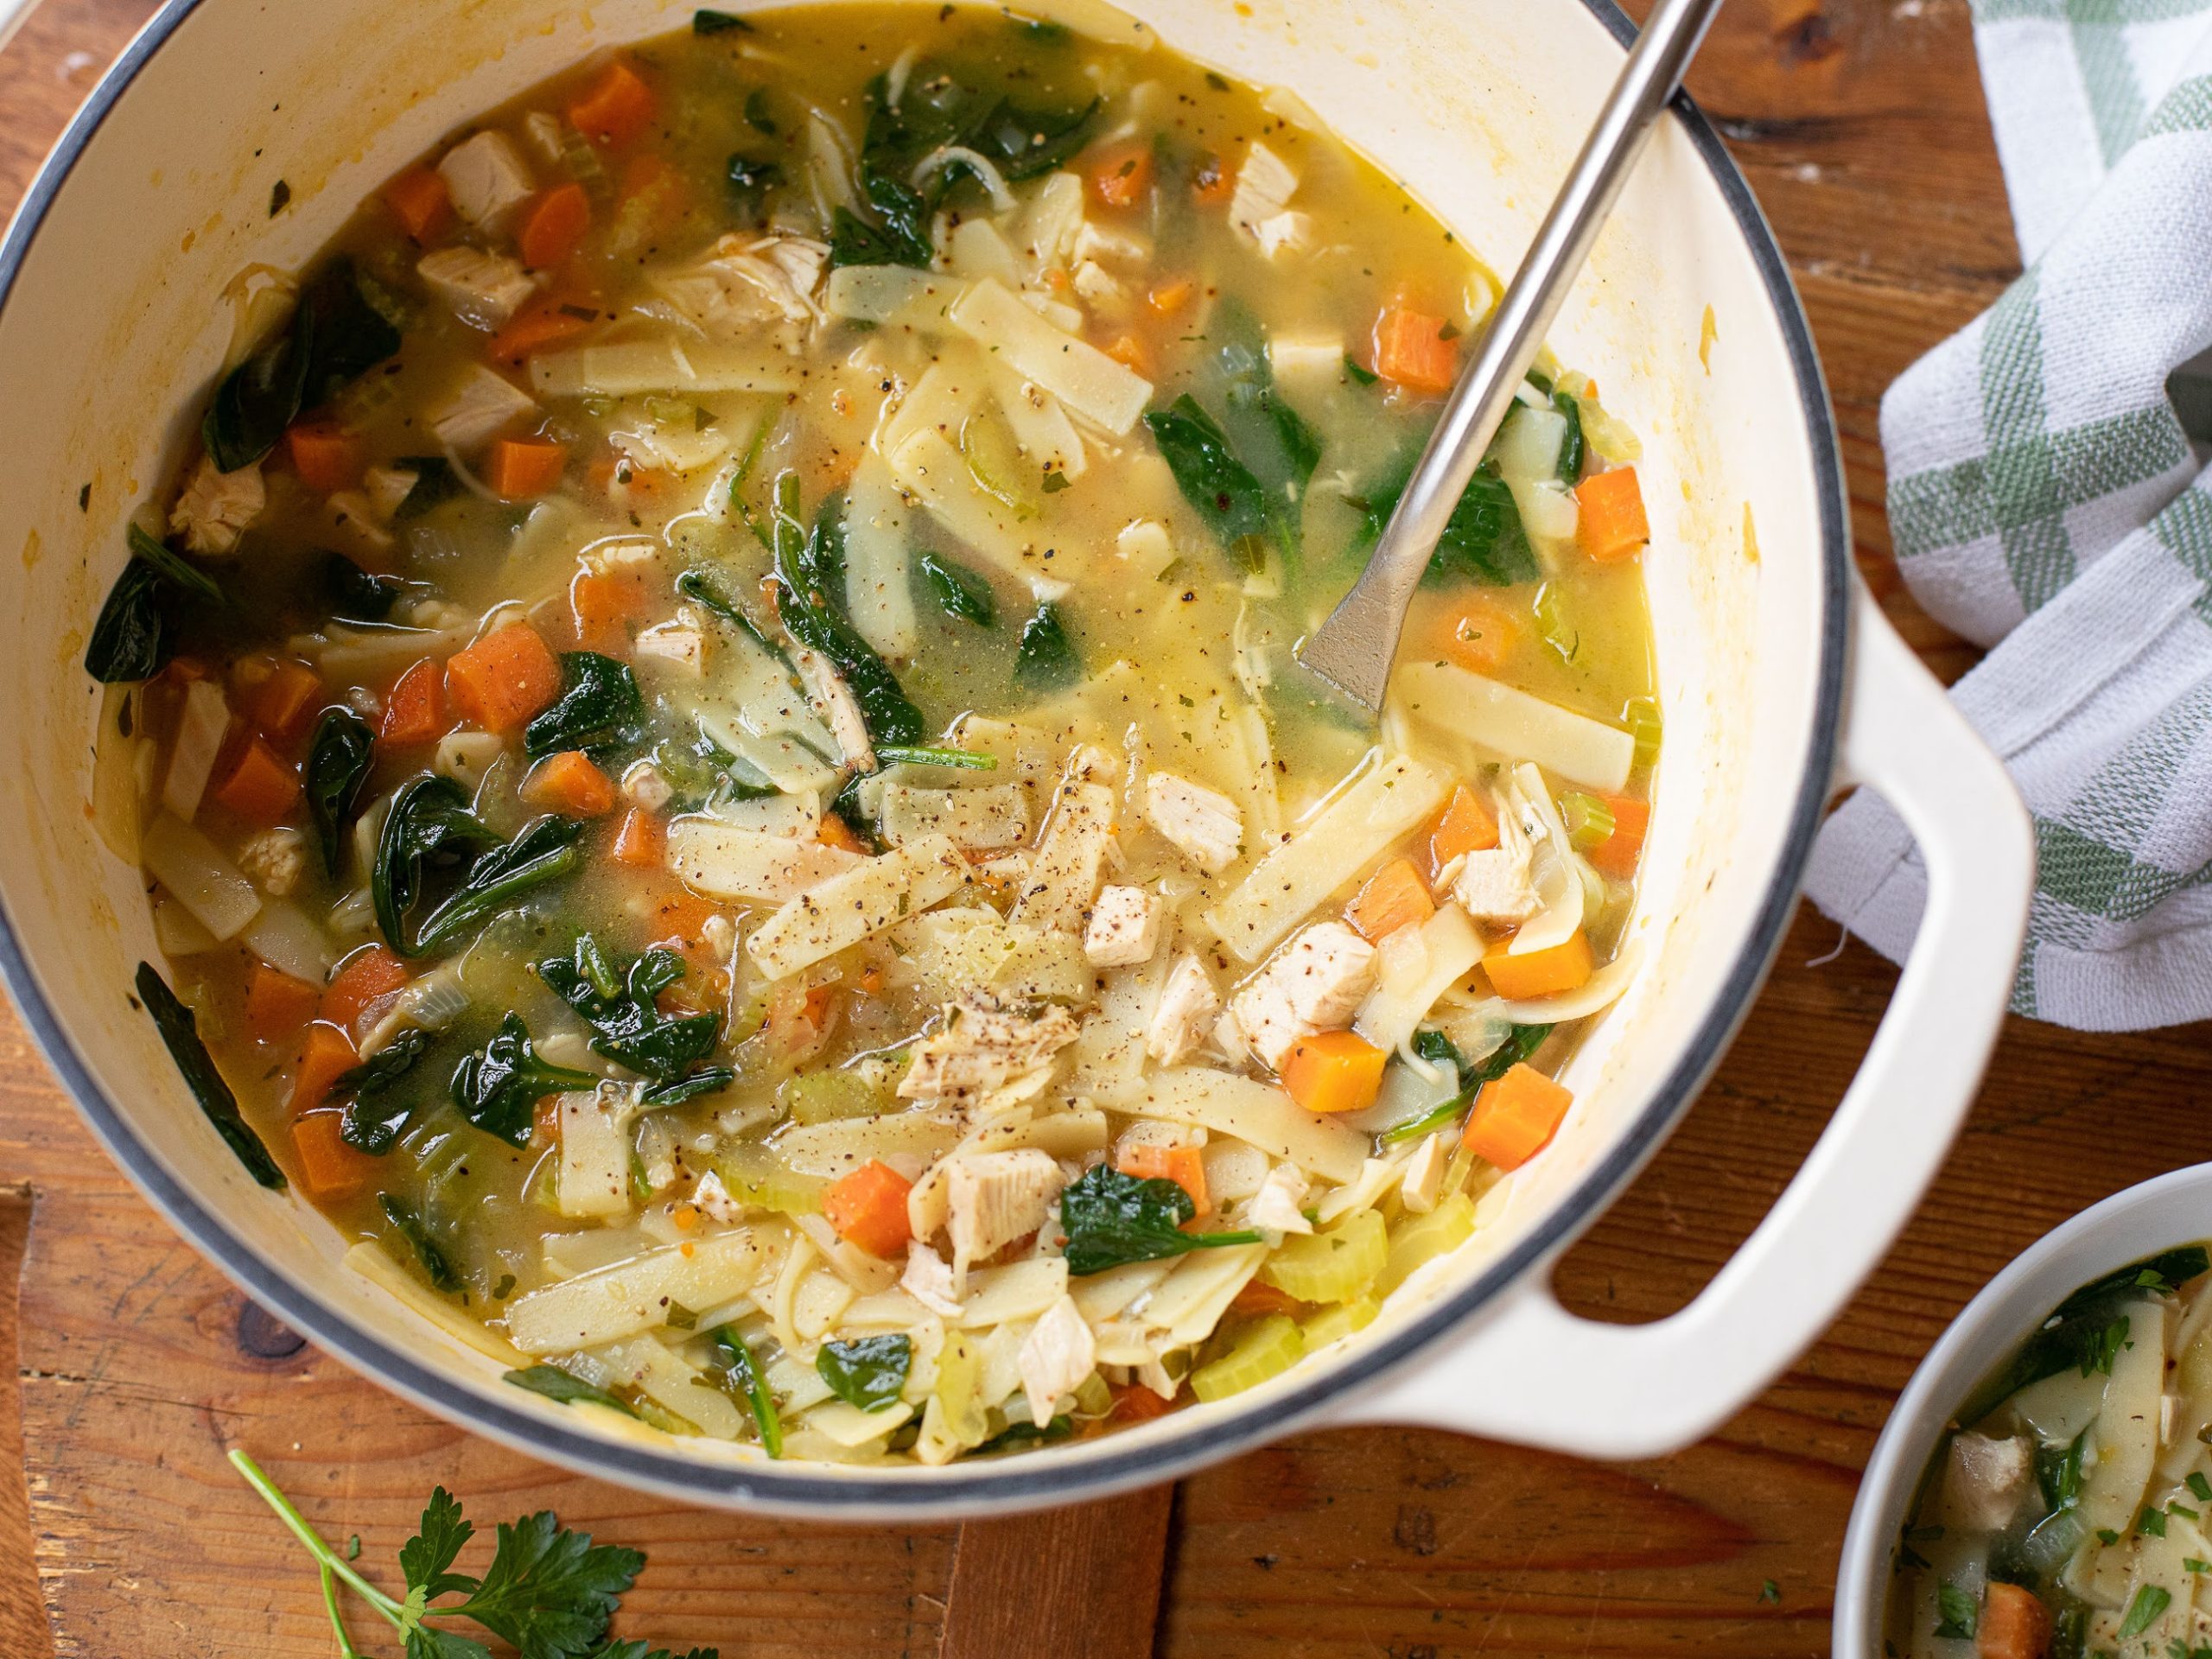 Try My Short Cut Chicken Noodle Soup Made With Knorr Sides & Save Now At Publix on I Heart Publix